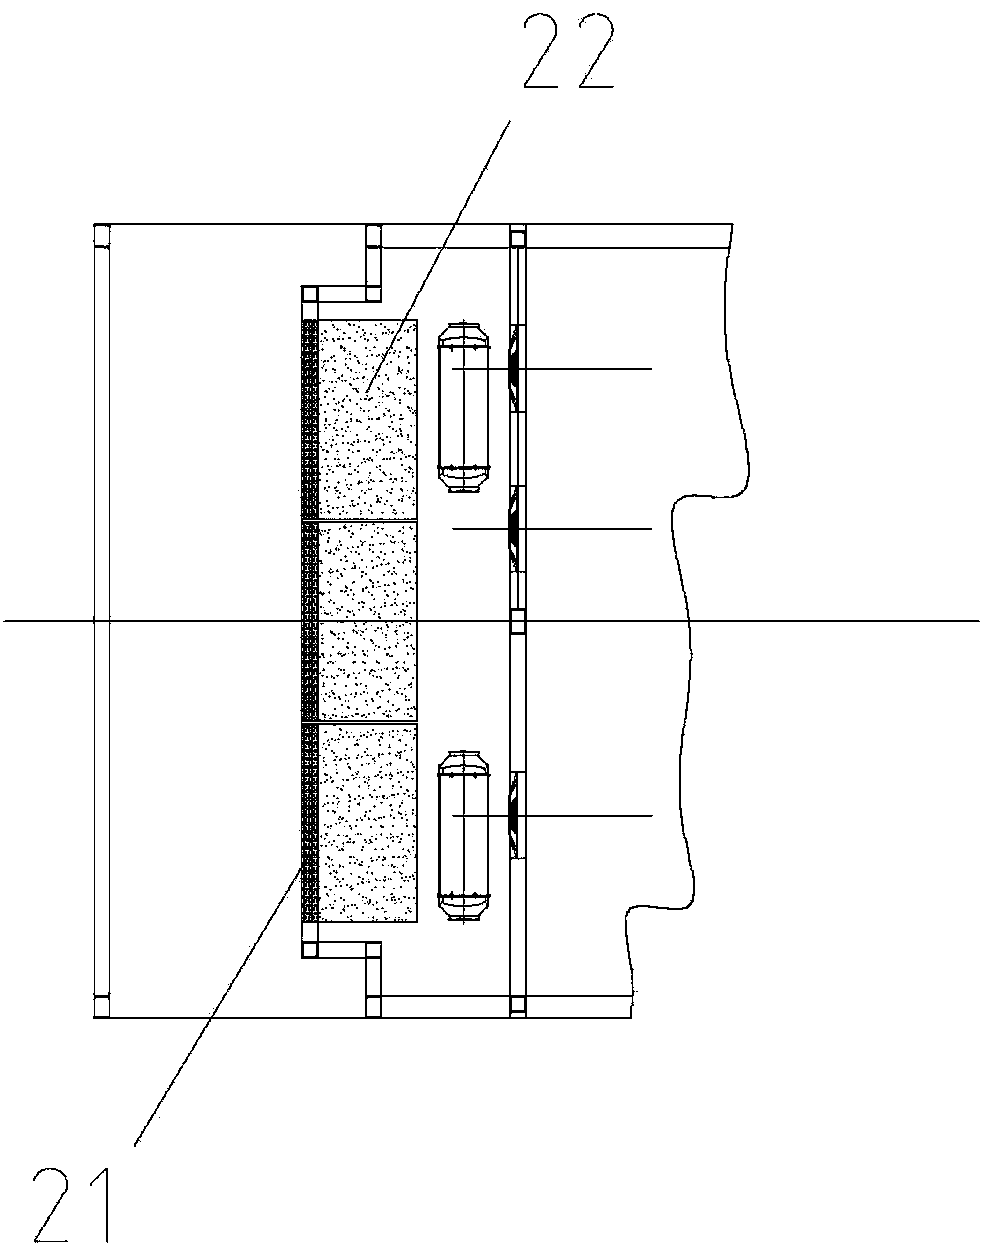 Full-sealed compartment used for conveying livestock and carrier vehicle provided with compartment